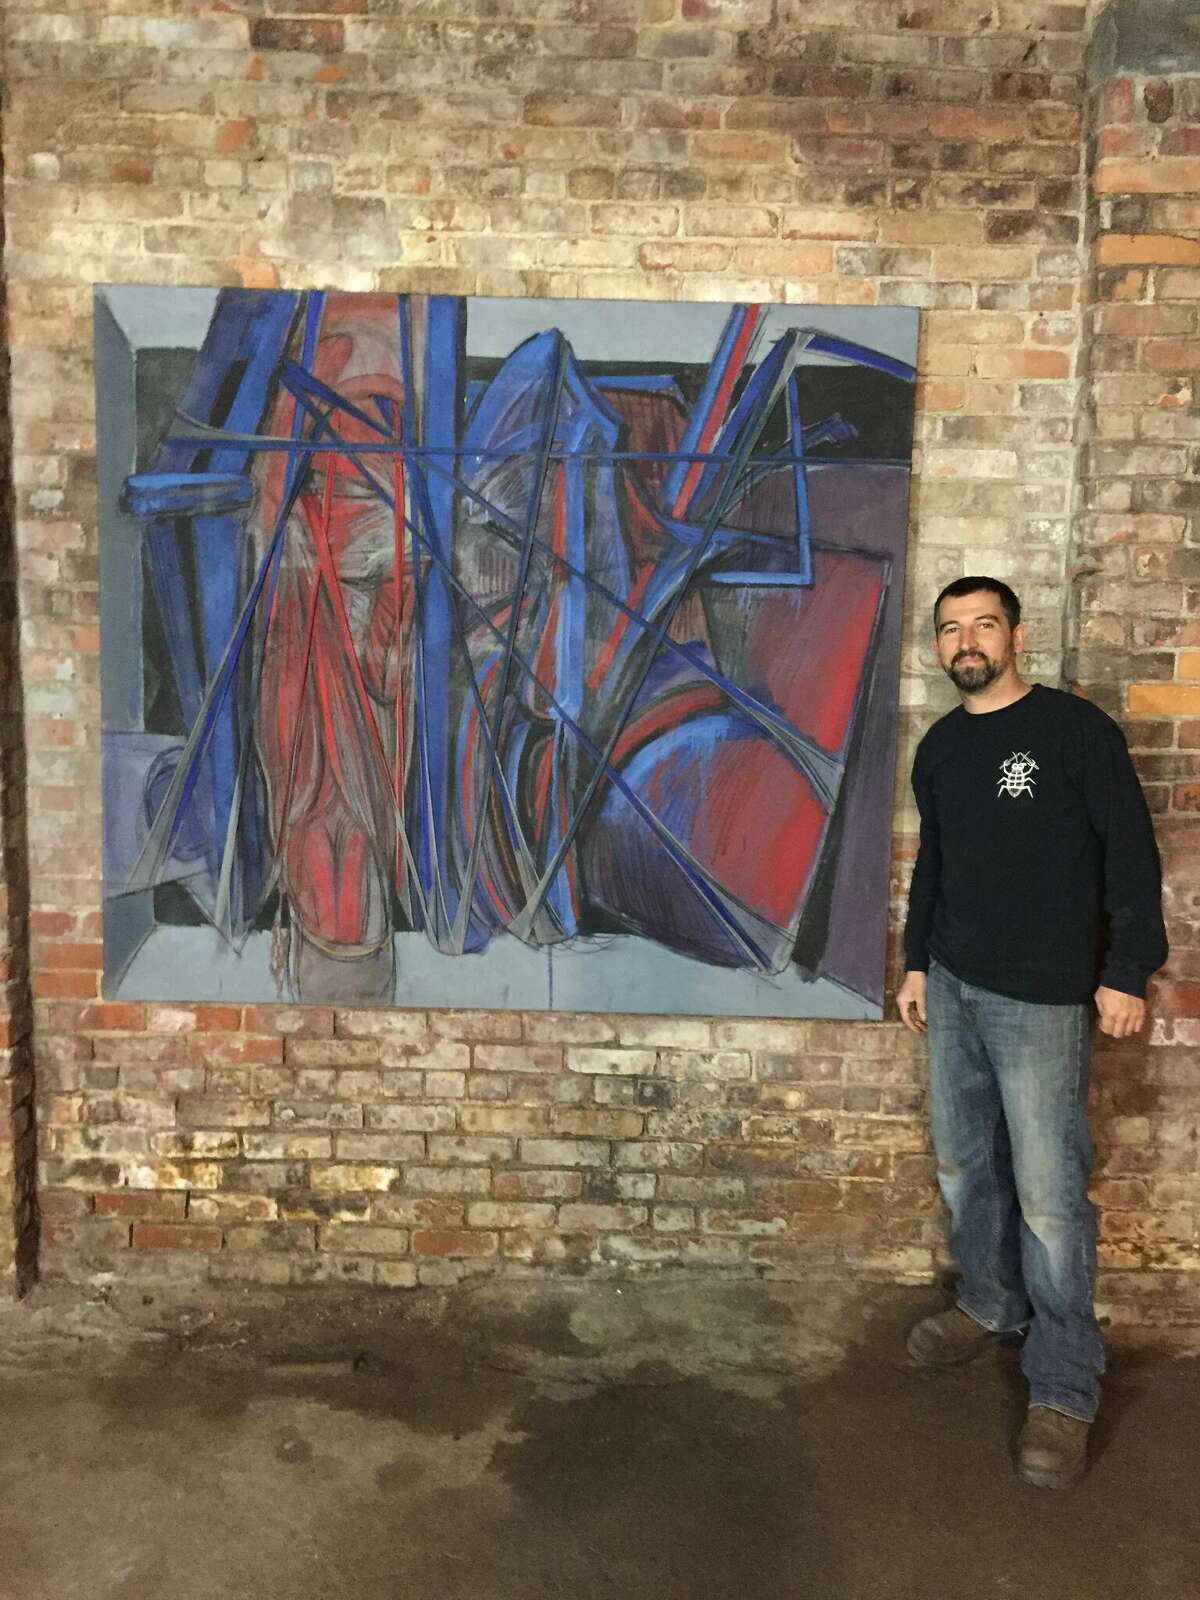 Jared Whipple, a car mechanic from Waterbury who found a large art collection from Francis Hines in a dumpster in Watertown, standing in front of Hines' painting. 